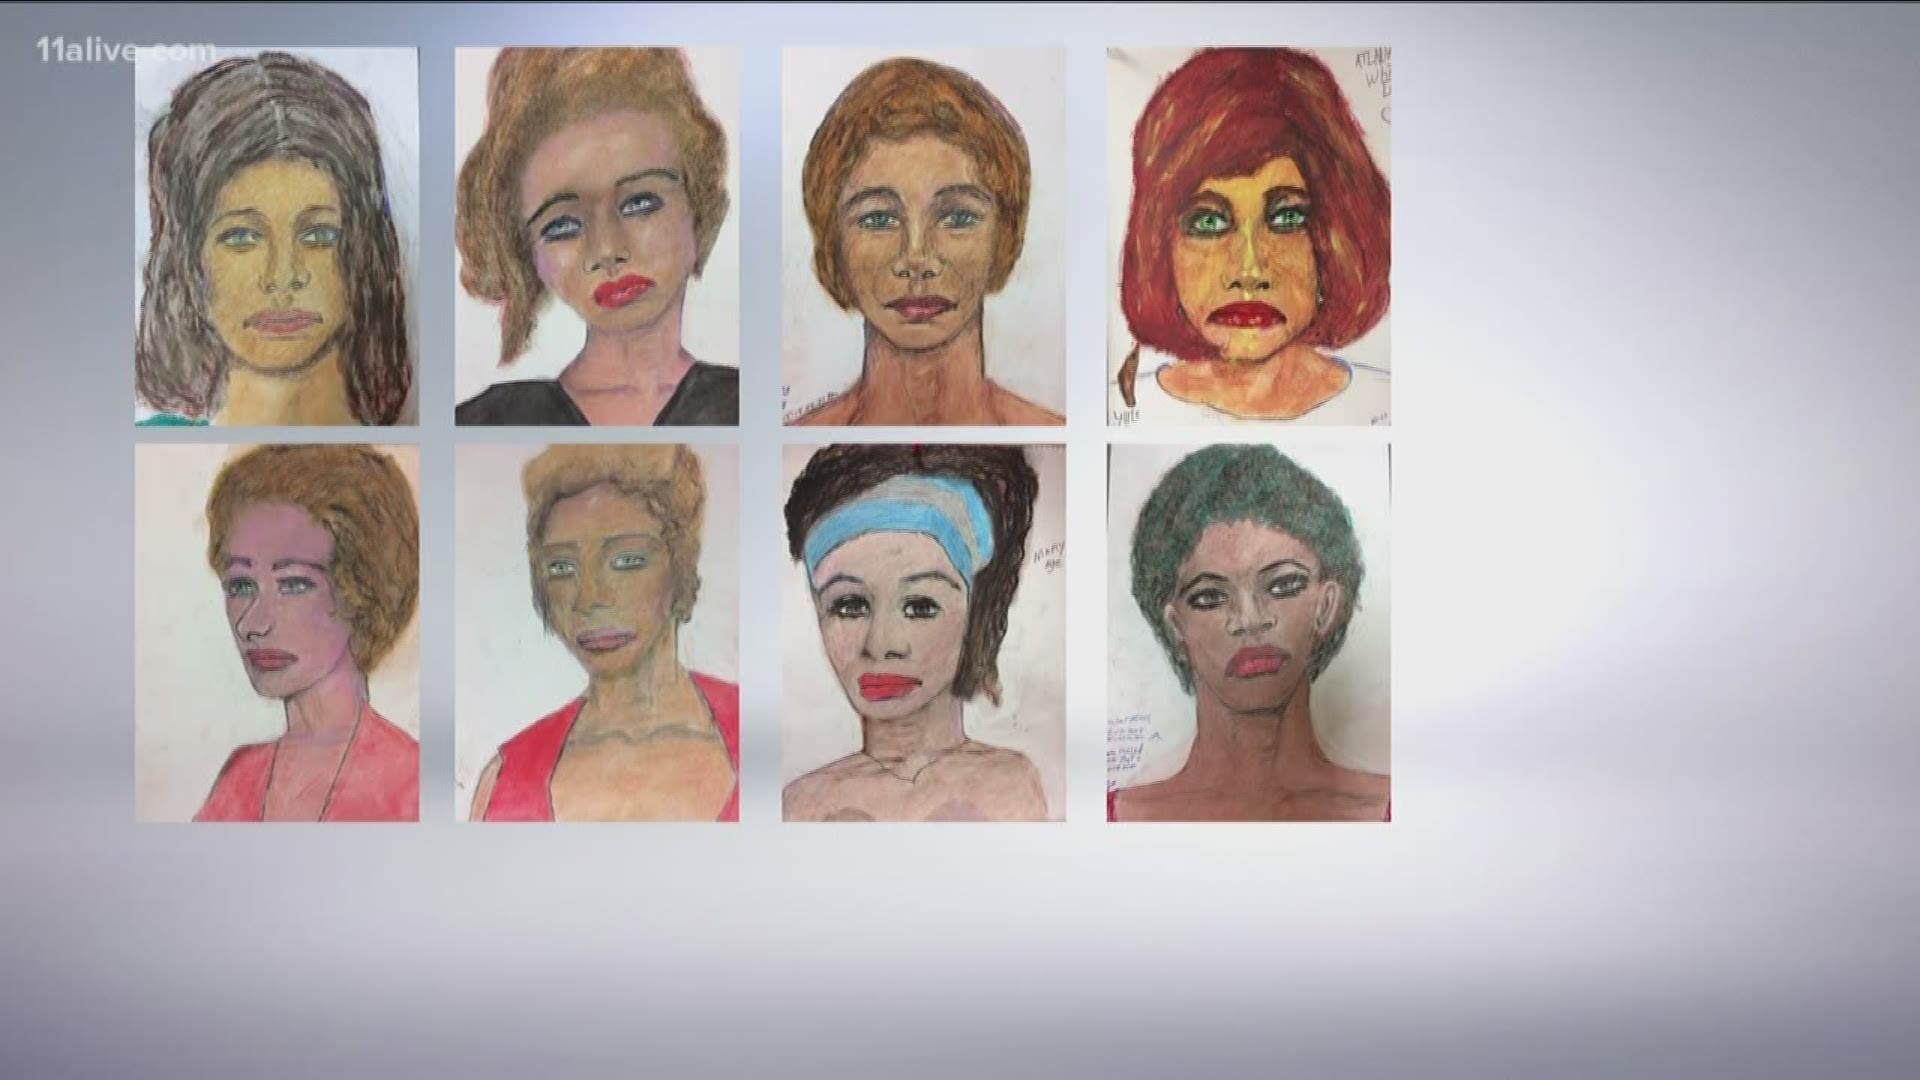 Samuel Little, the Georgia-born serial killer who claims to have killed nearly 90 women, has sketched the likeness of several of his alleged victims.